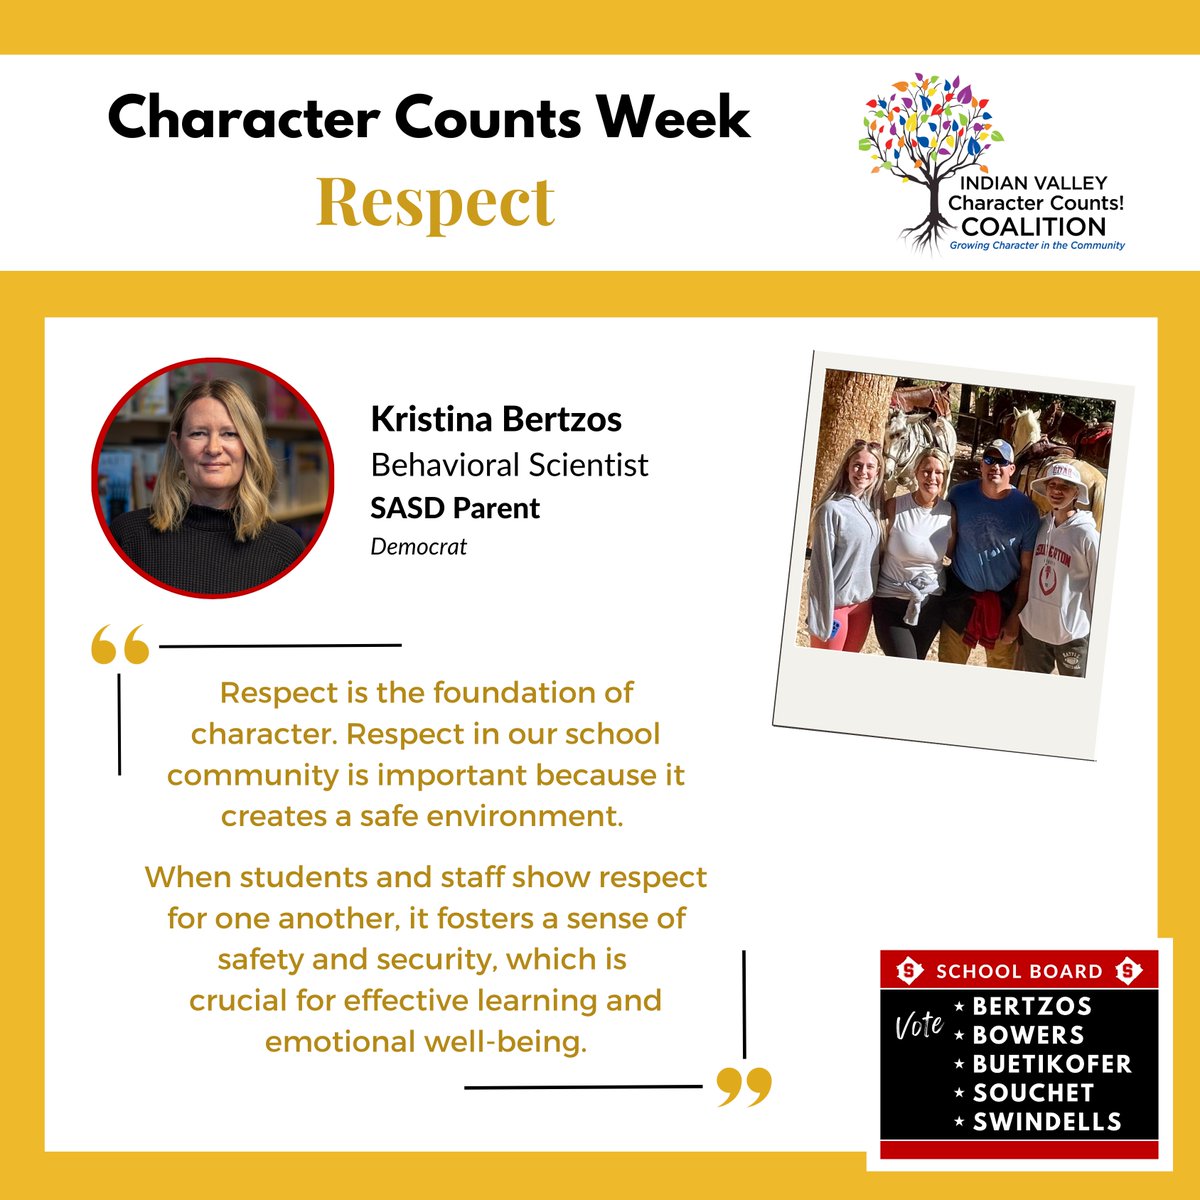 It's Character Counts week!

Wednesday's trait is Respect.

To find out more about what we stand for, visit our website: soudertonforresponsibleleadership.com/issues

#sasd #charactercounts #responsibleleadership